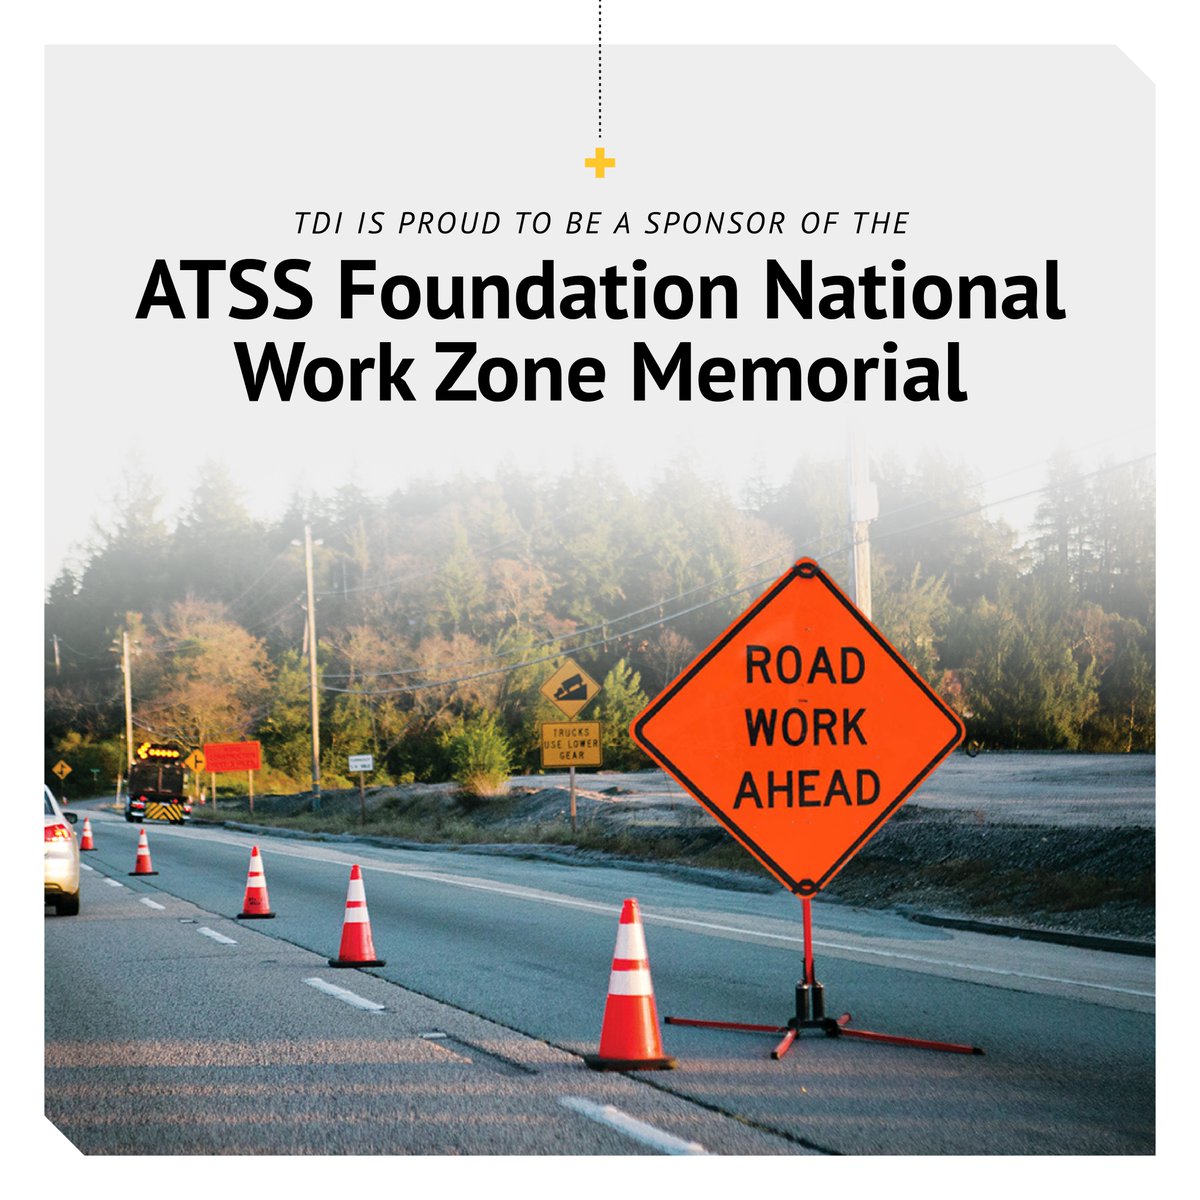 This #NWZAW & as a proud sponsor of the ATSS National Work Zone Memorial, TDI remembers the fallen heroes of the transportation industry.  By remembering their sacrifice & investing in future safety professionals, we ensure #SafetyNeverStops. #ATSSMemorial